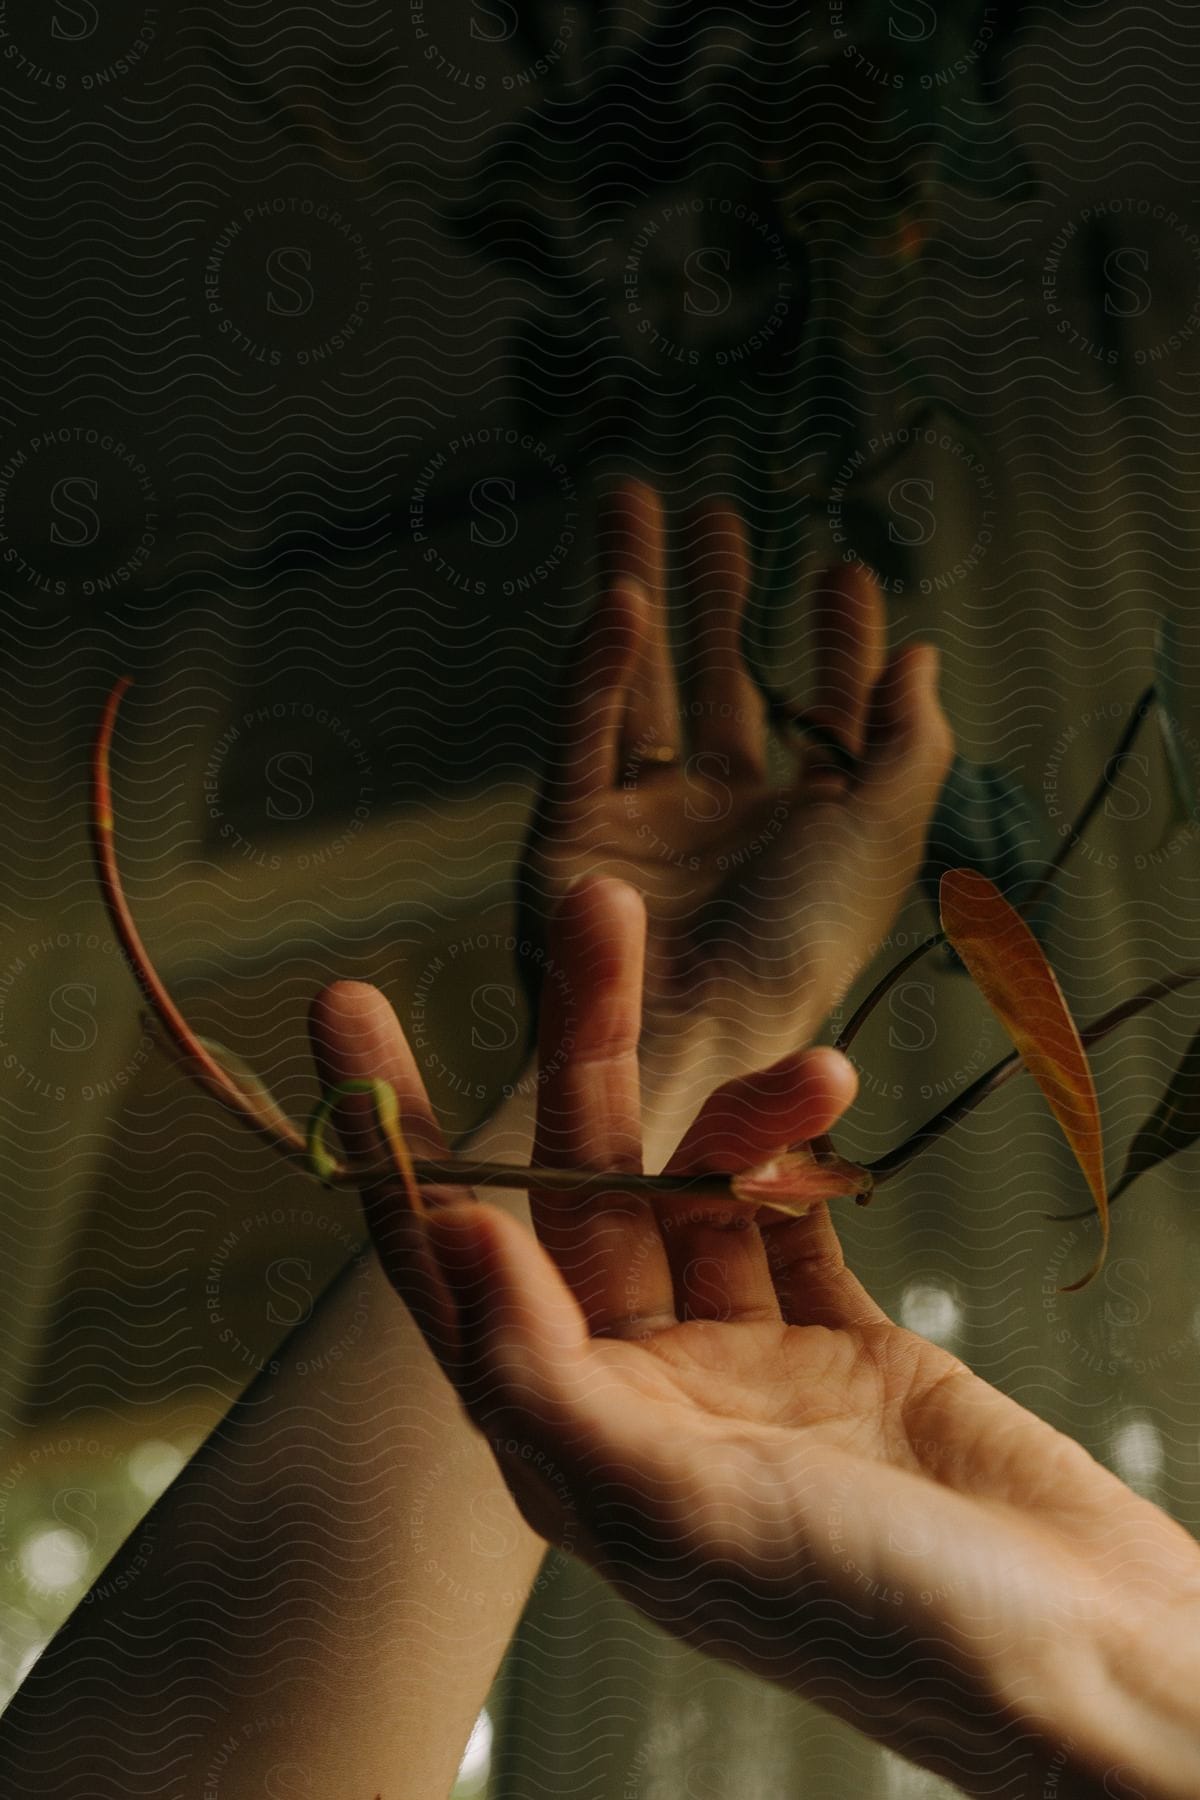 Two hands holding a plant with slender leaves illuminated by soft natural light filtering through a window